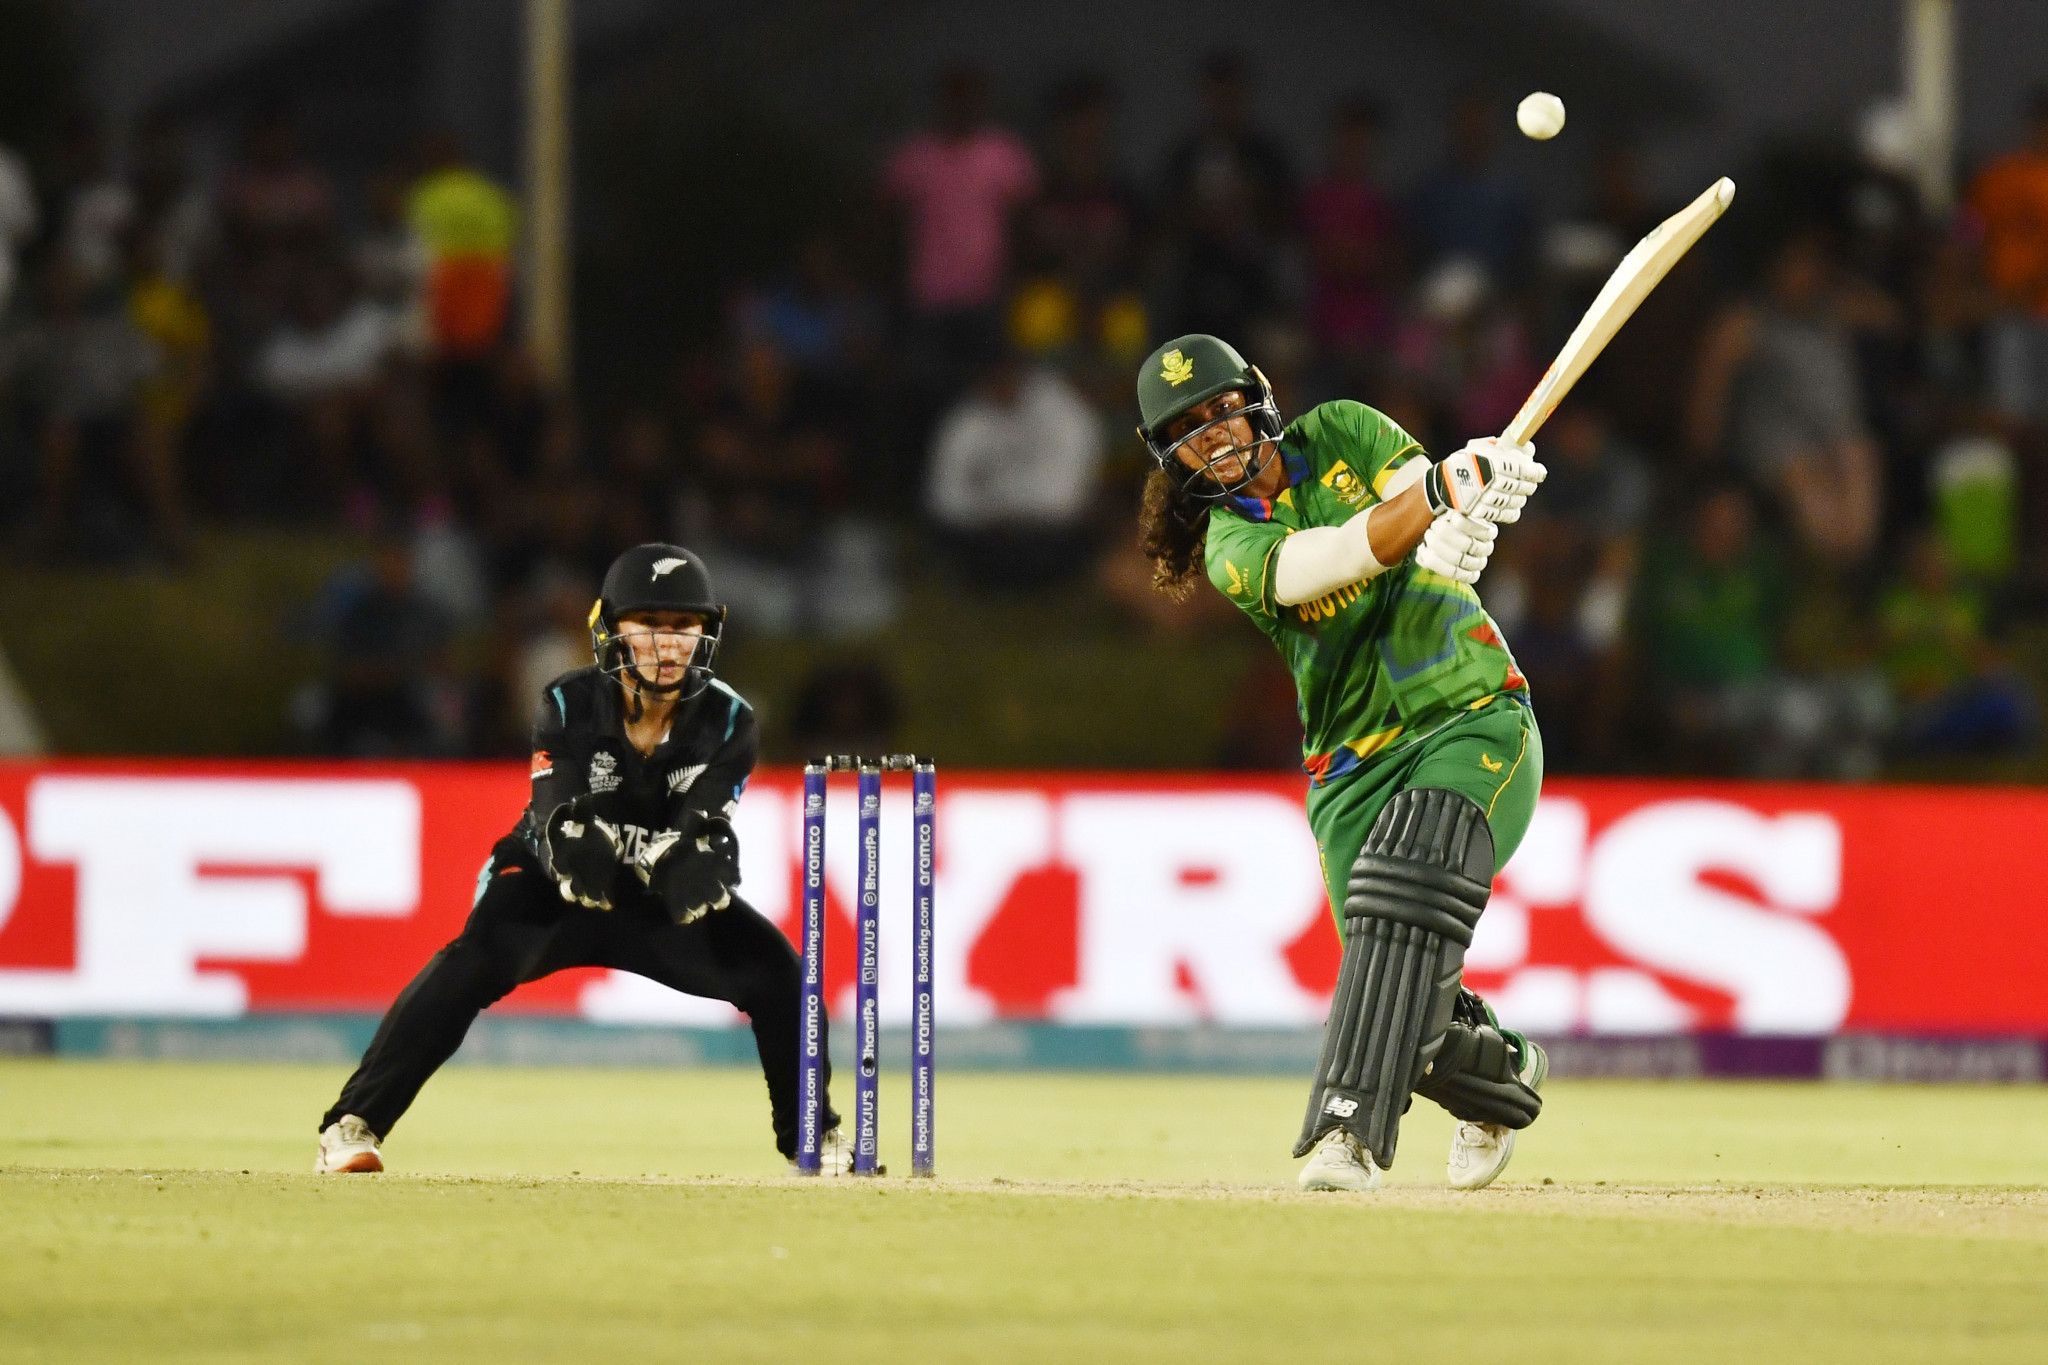 Chloe Tryon helped South Africa earn their first win of a home Women's T20 World Cup ©Getty Images